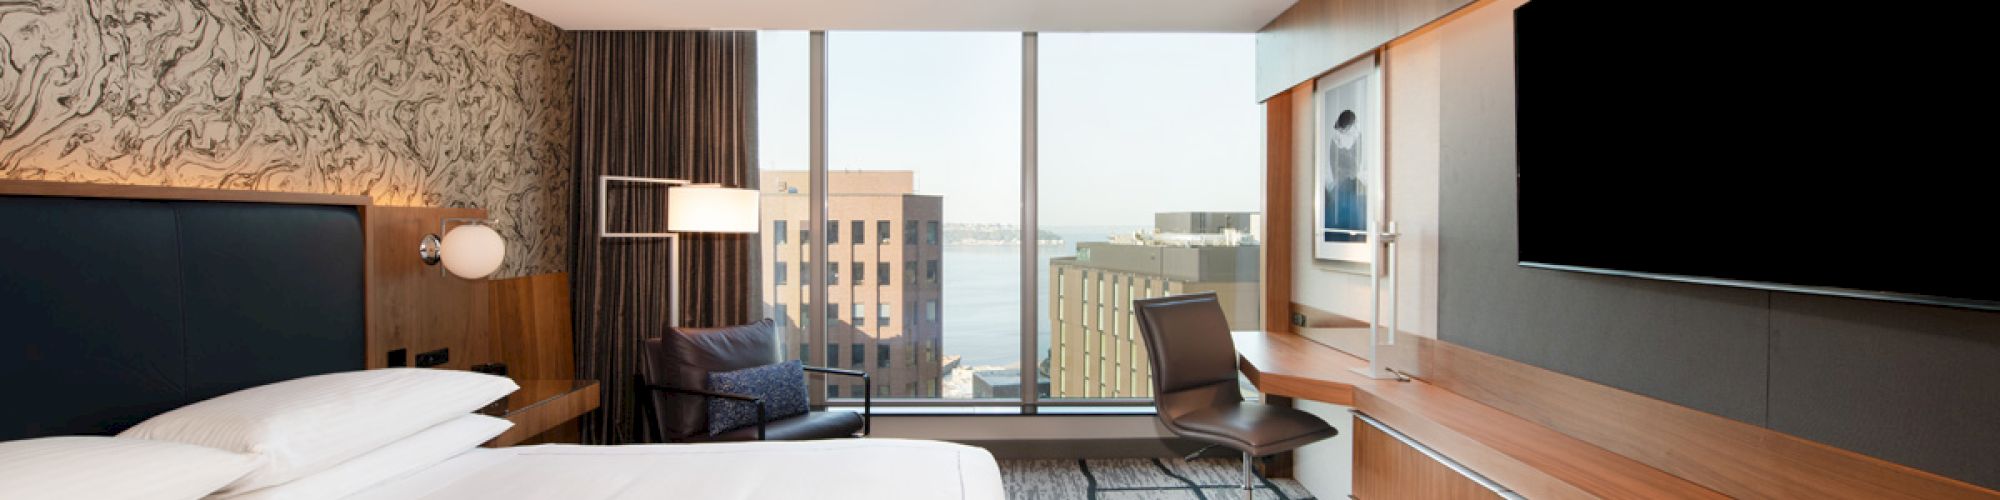 A modern hotel room with a large bed, wall-mounted TV, desk, chair, and a view of city buildings from a large window.